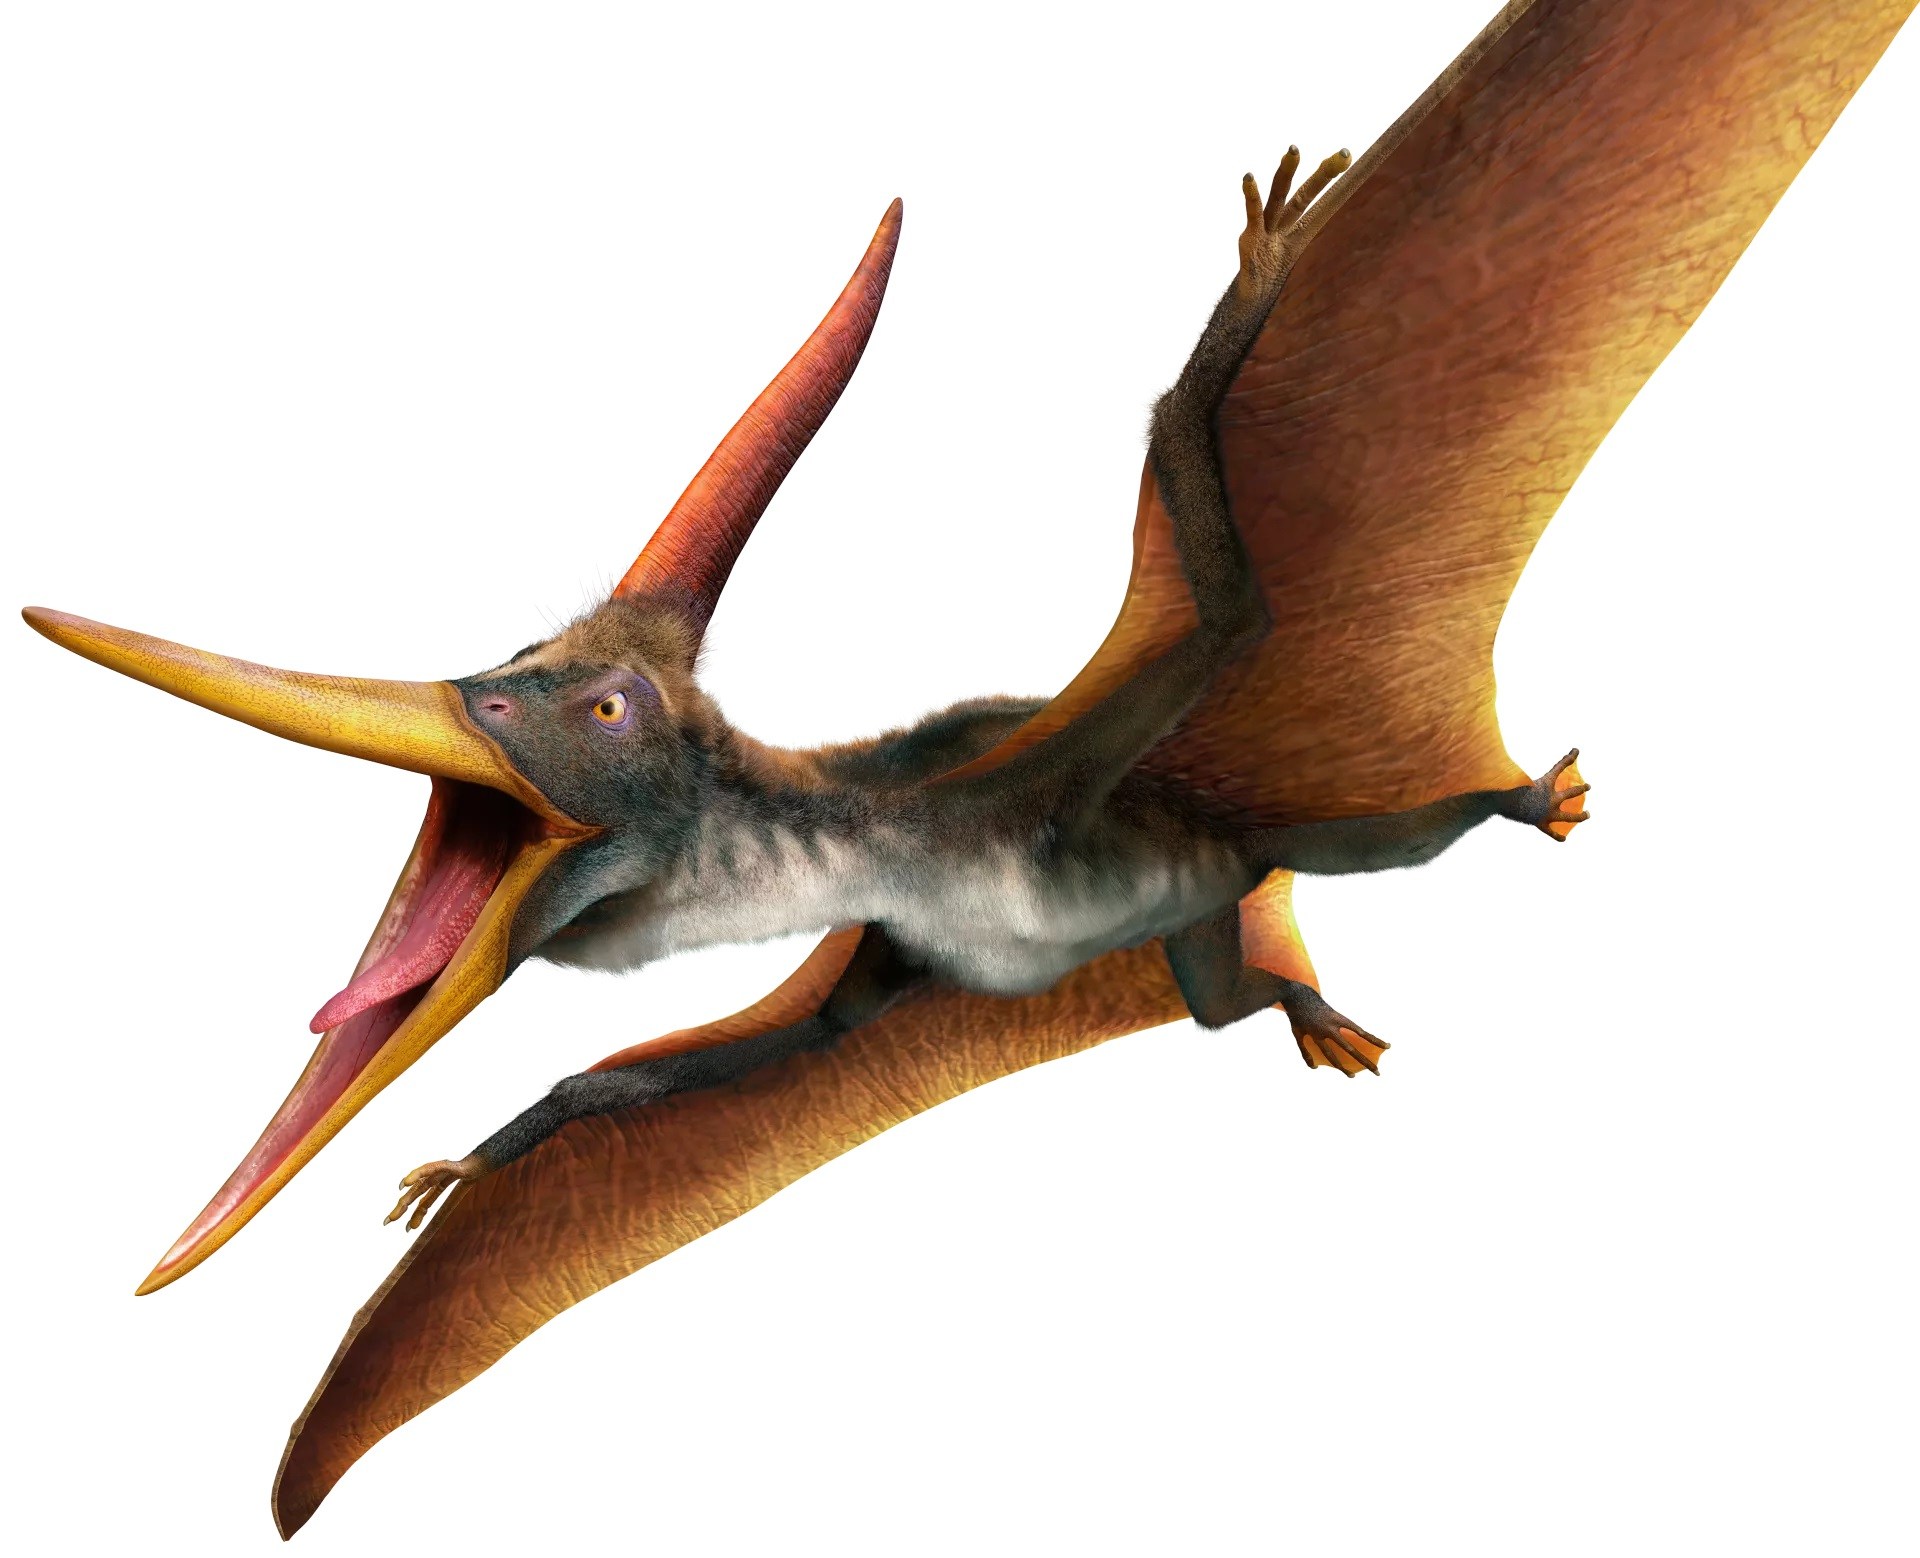 10 Pteranodon Facts For Kids - Facts.net